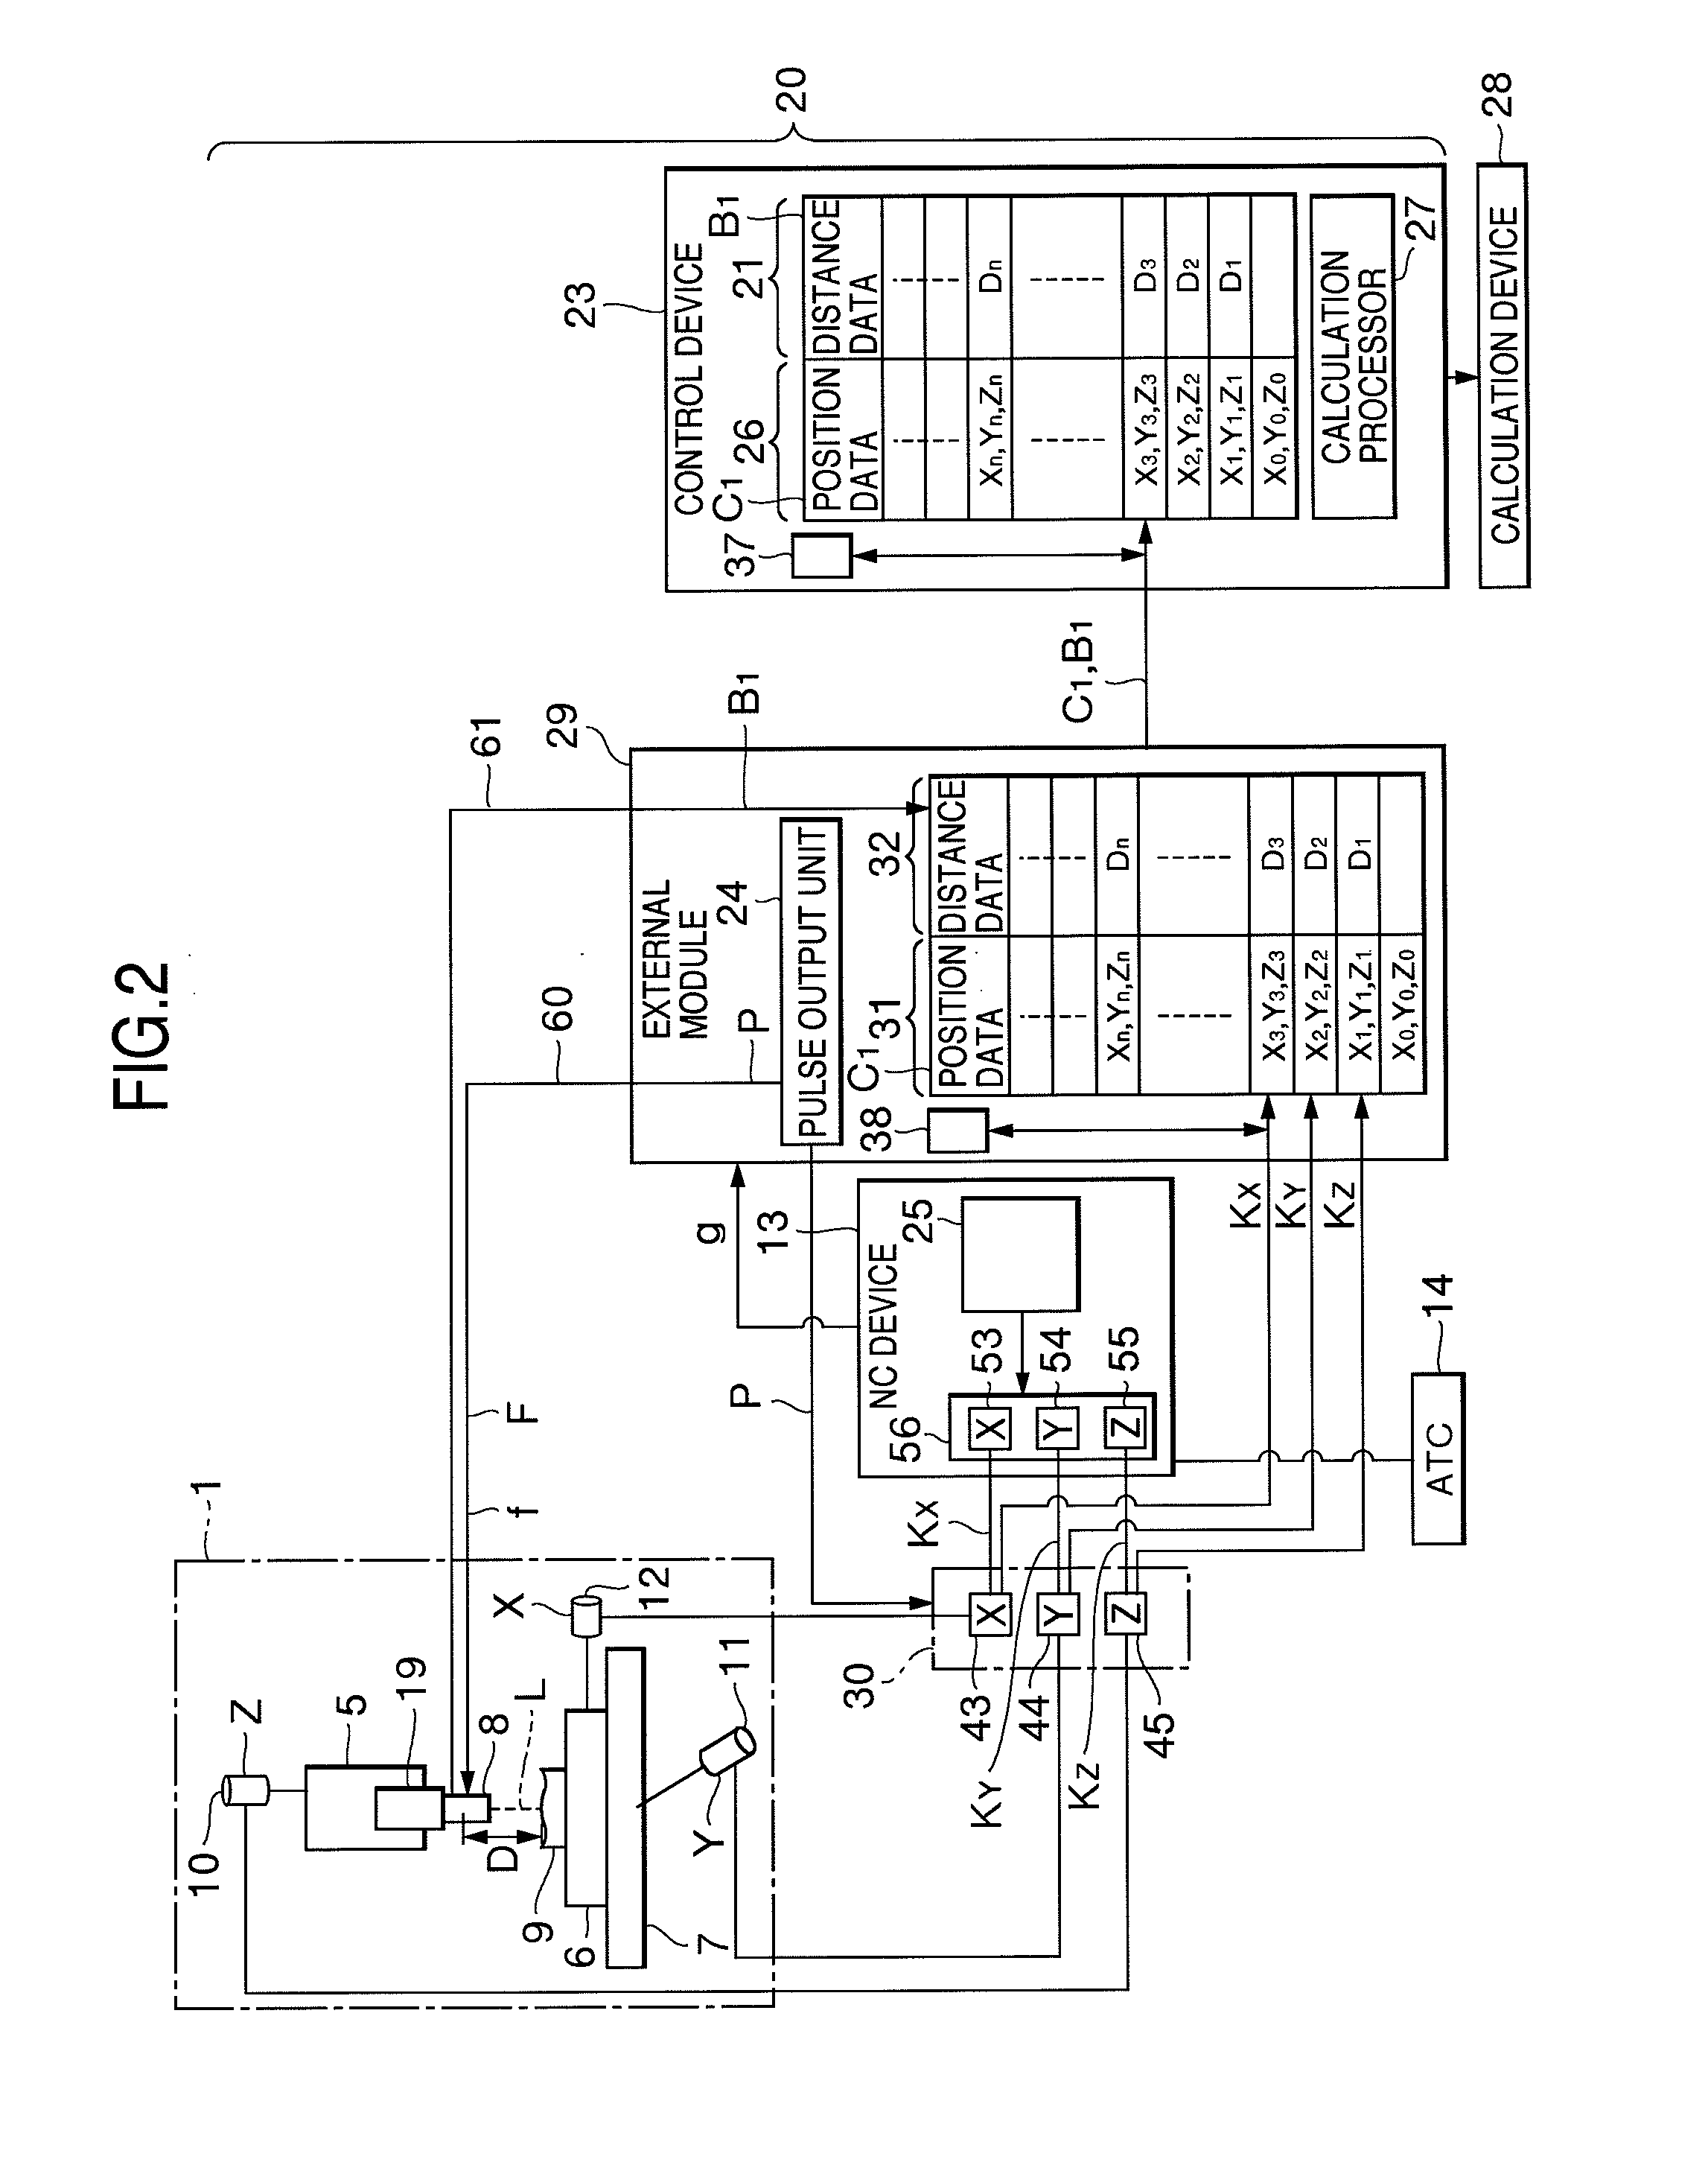 Apparatus for and method of measuring workpiece on machine tool